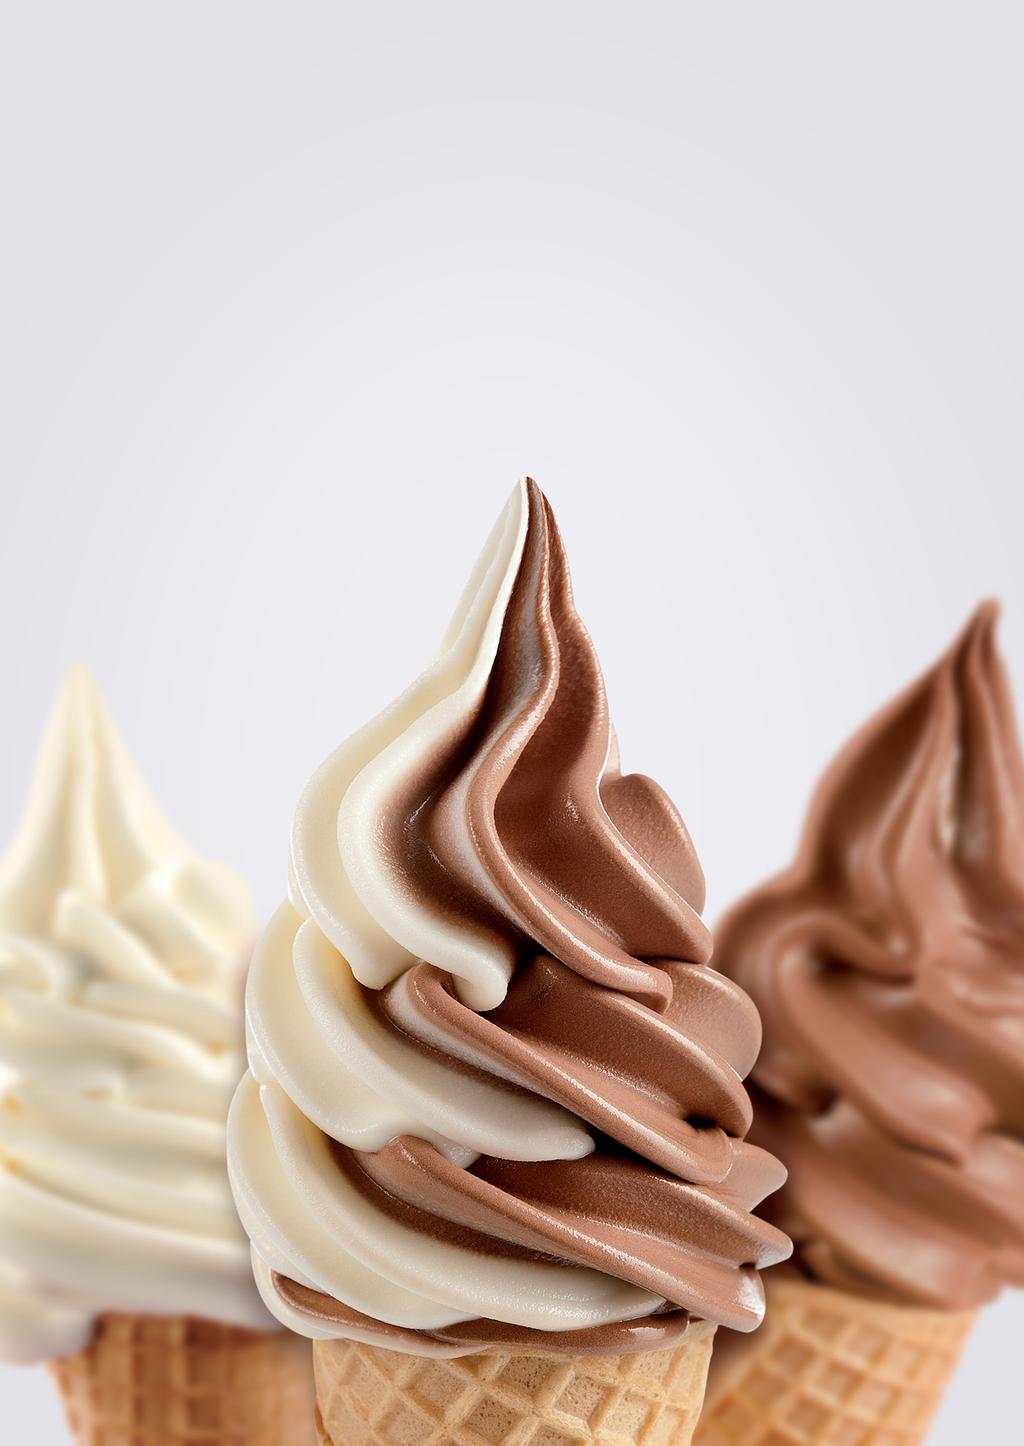 world class machines A Carpigiani soft serve machine turns fresh ingredients into sumptuously creamy product, ready to serve in a matter of minutes.